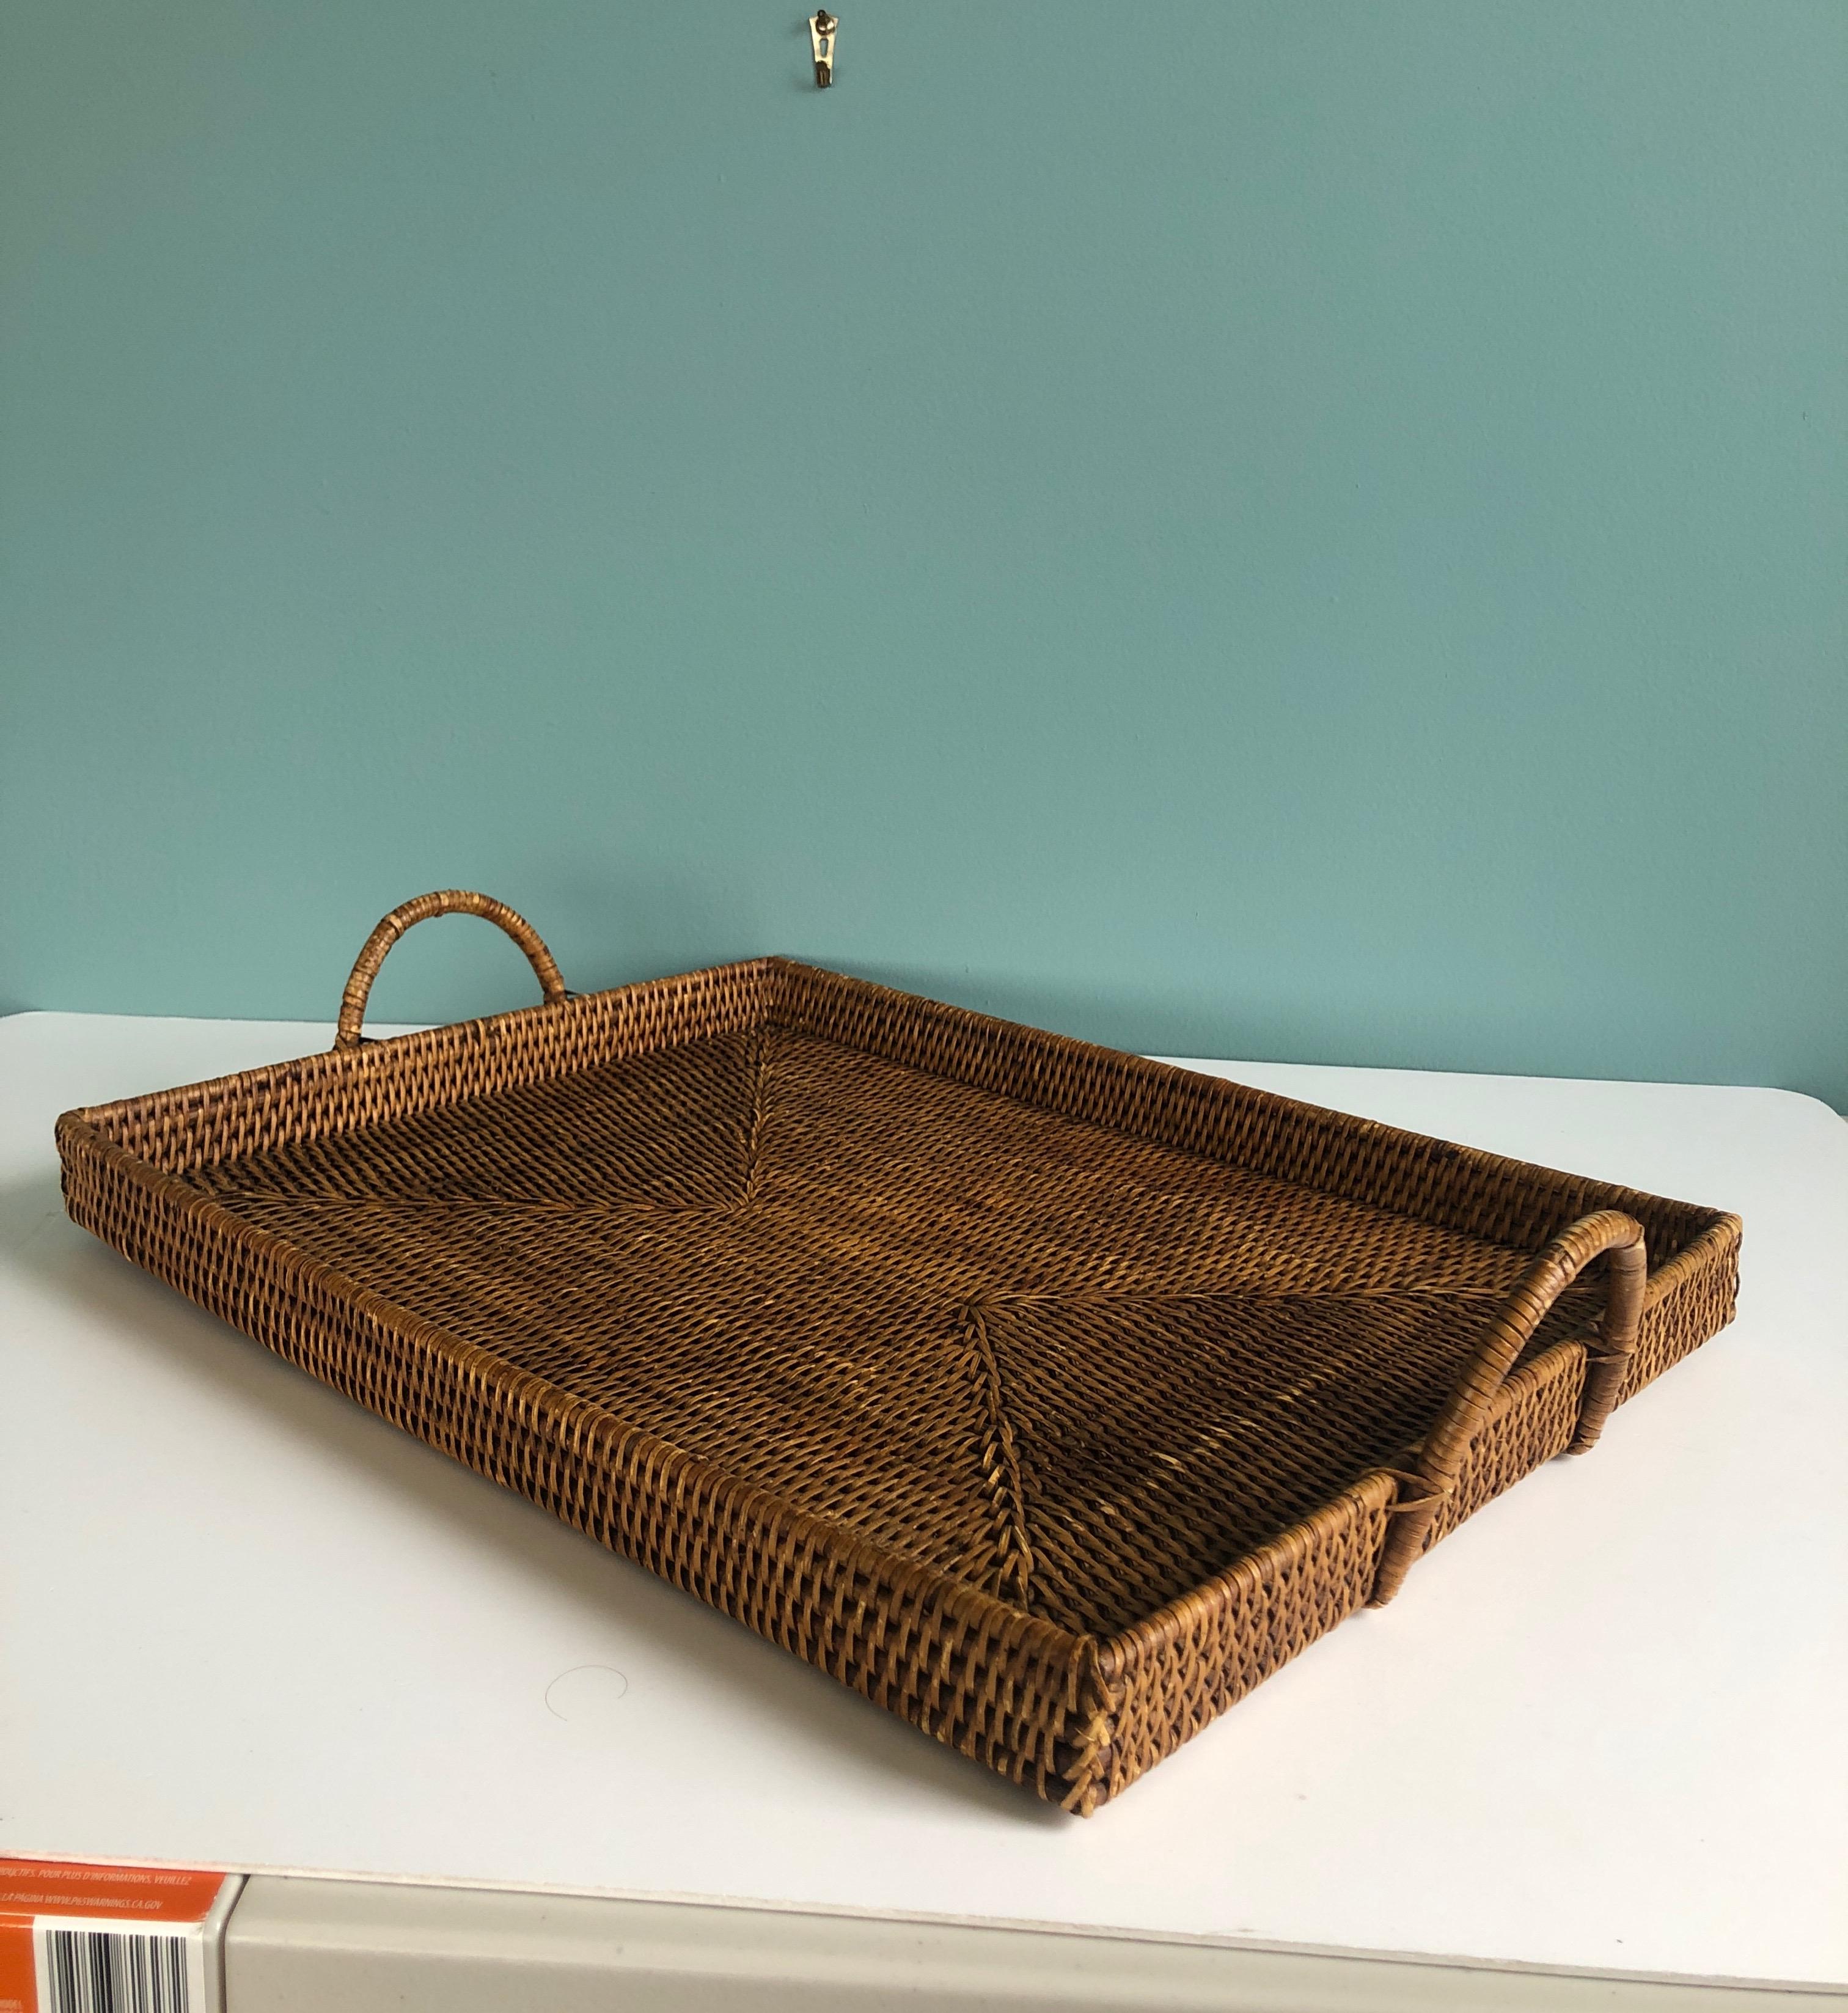 Large woven rattan serving tray with handles
Measures: 1.5” W x 14.75” D x 4” H. (to top of handle).
 